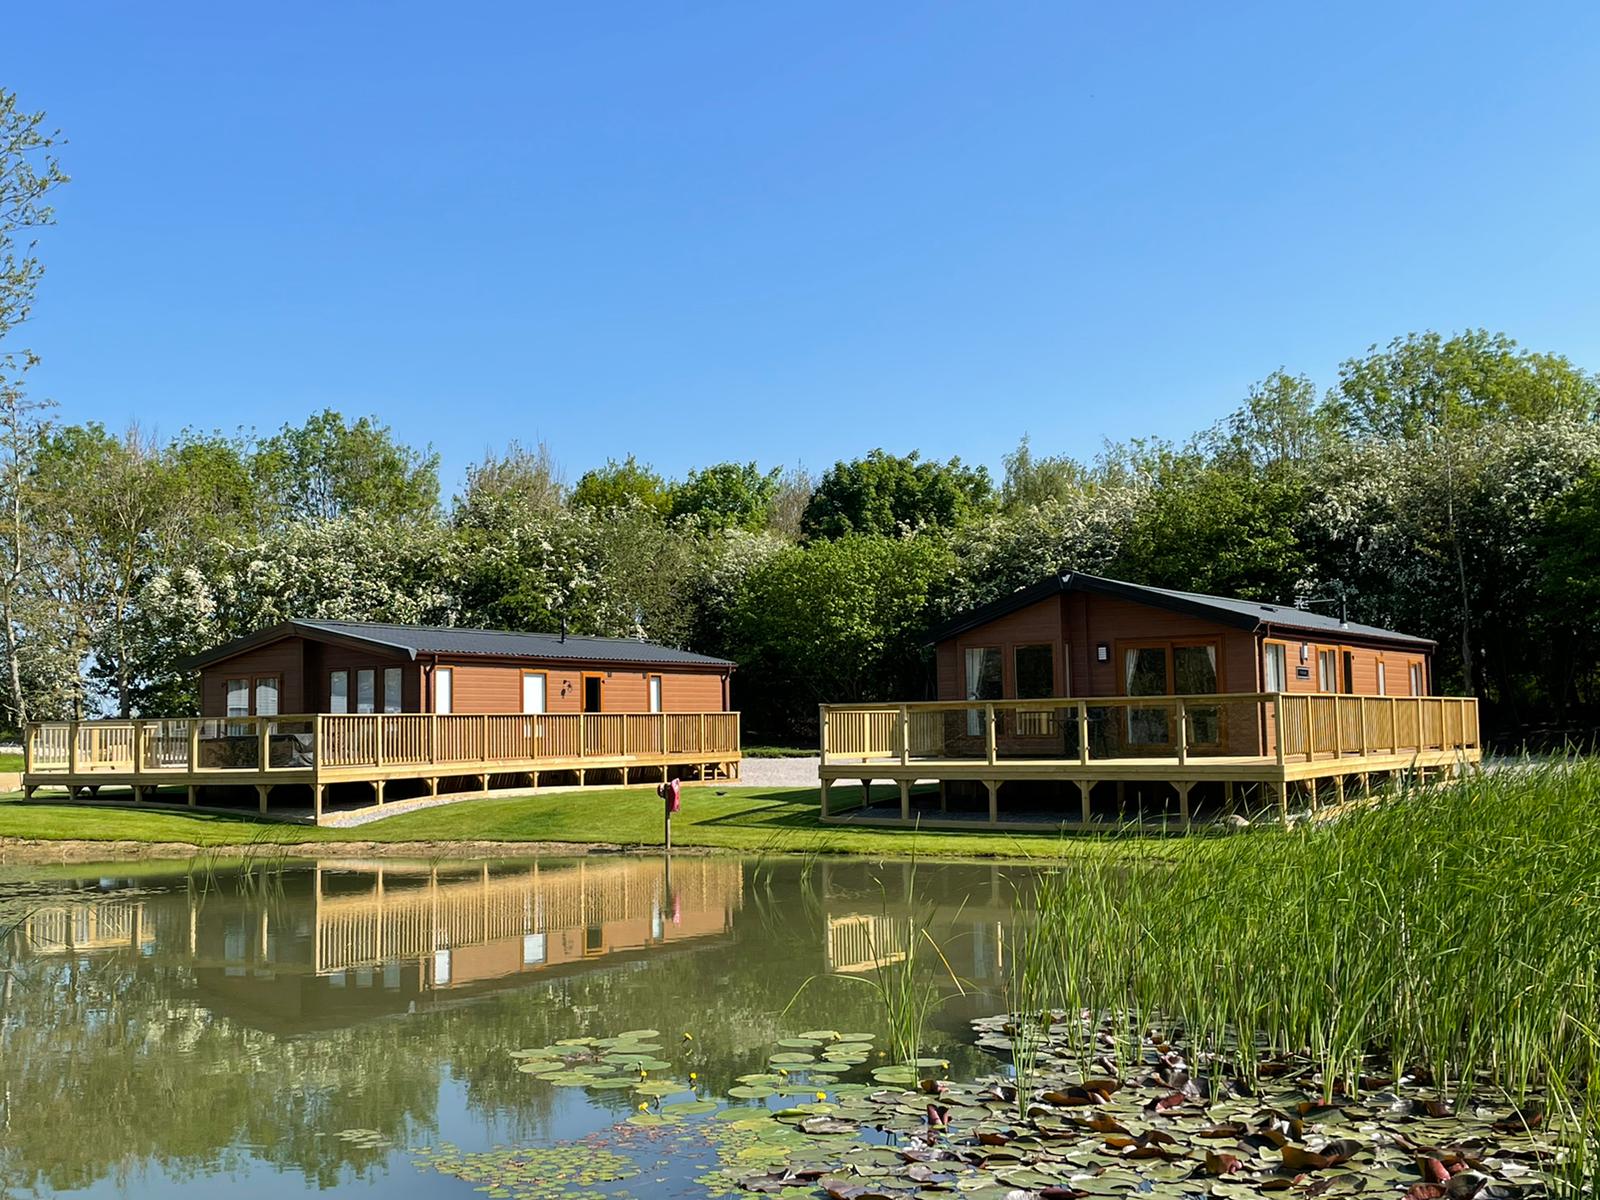 Caravans on the edge of a lake at Brickyard Lakes – the perfect spot to enjoy your North Yorkshire caravan holidays